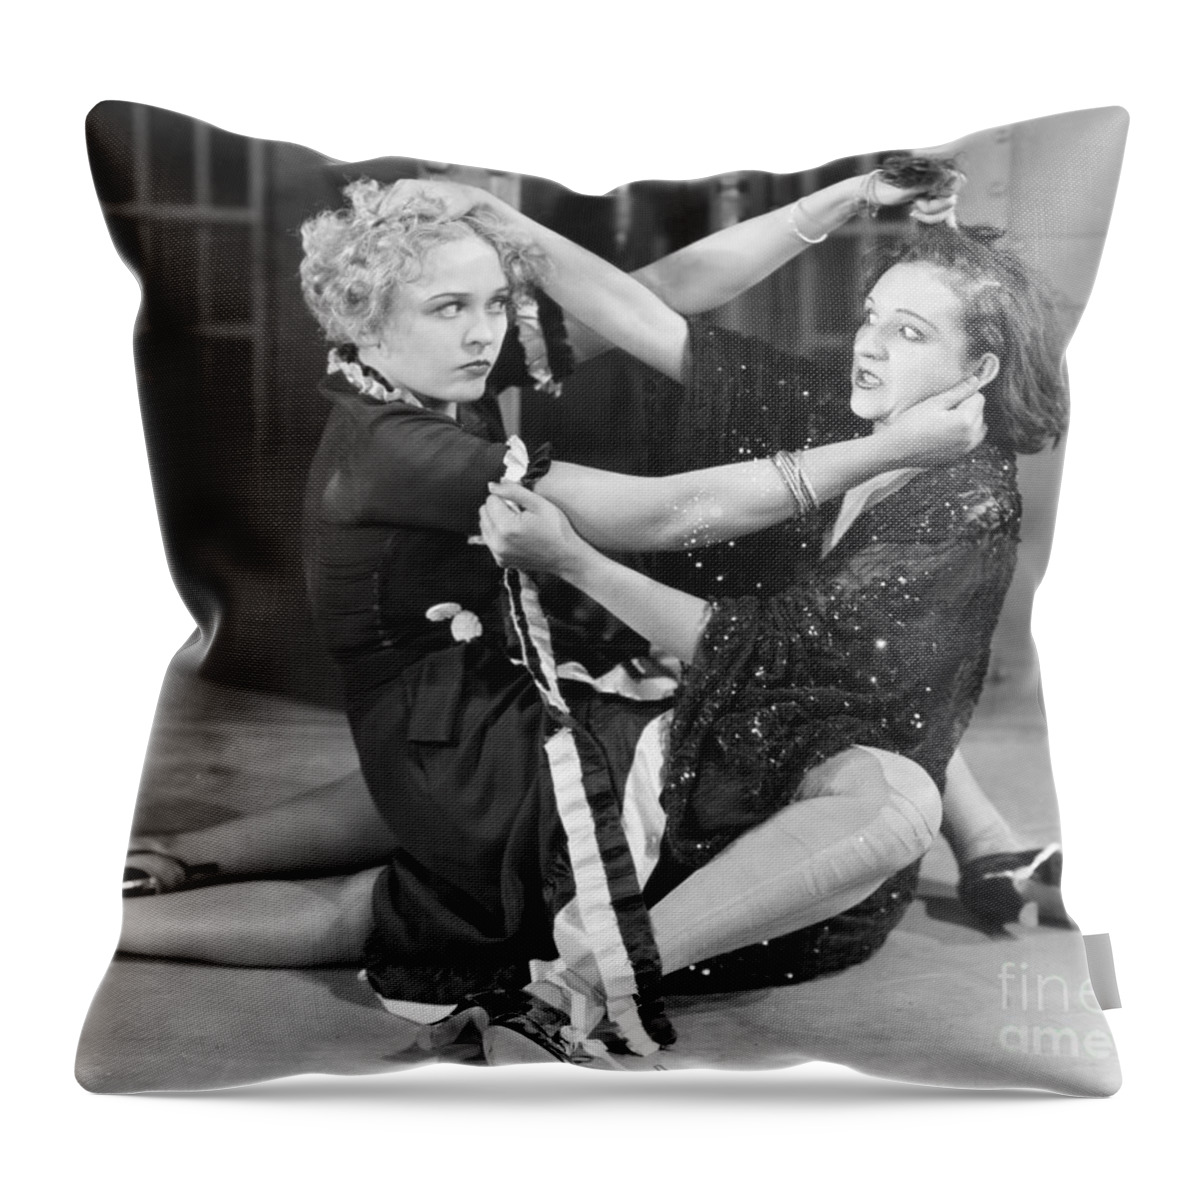 -fights- Throw Pillow featuring the photograph Film Still: Chicago, 1927 by Granger